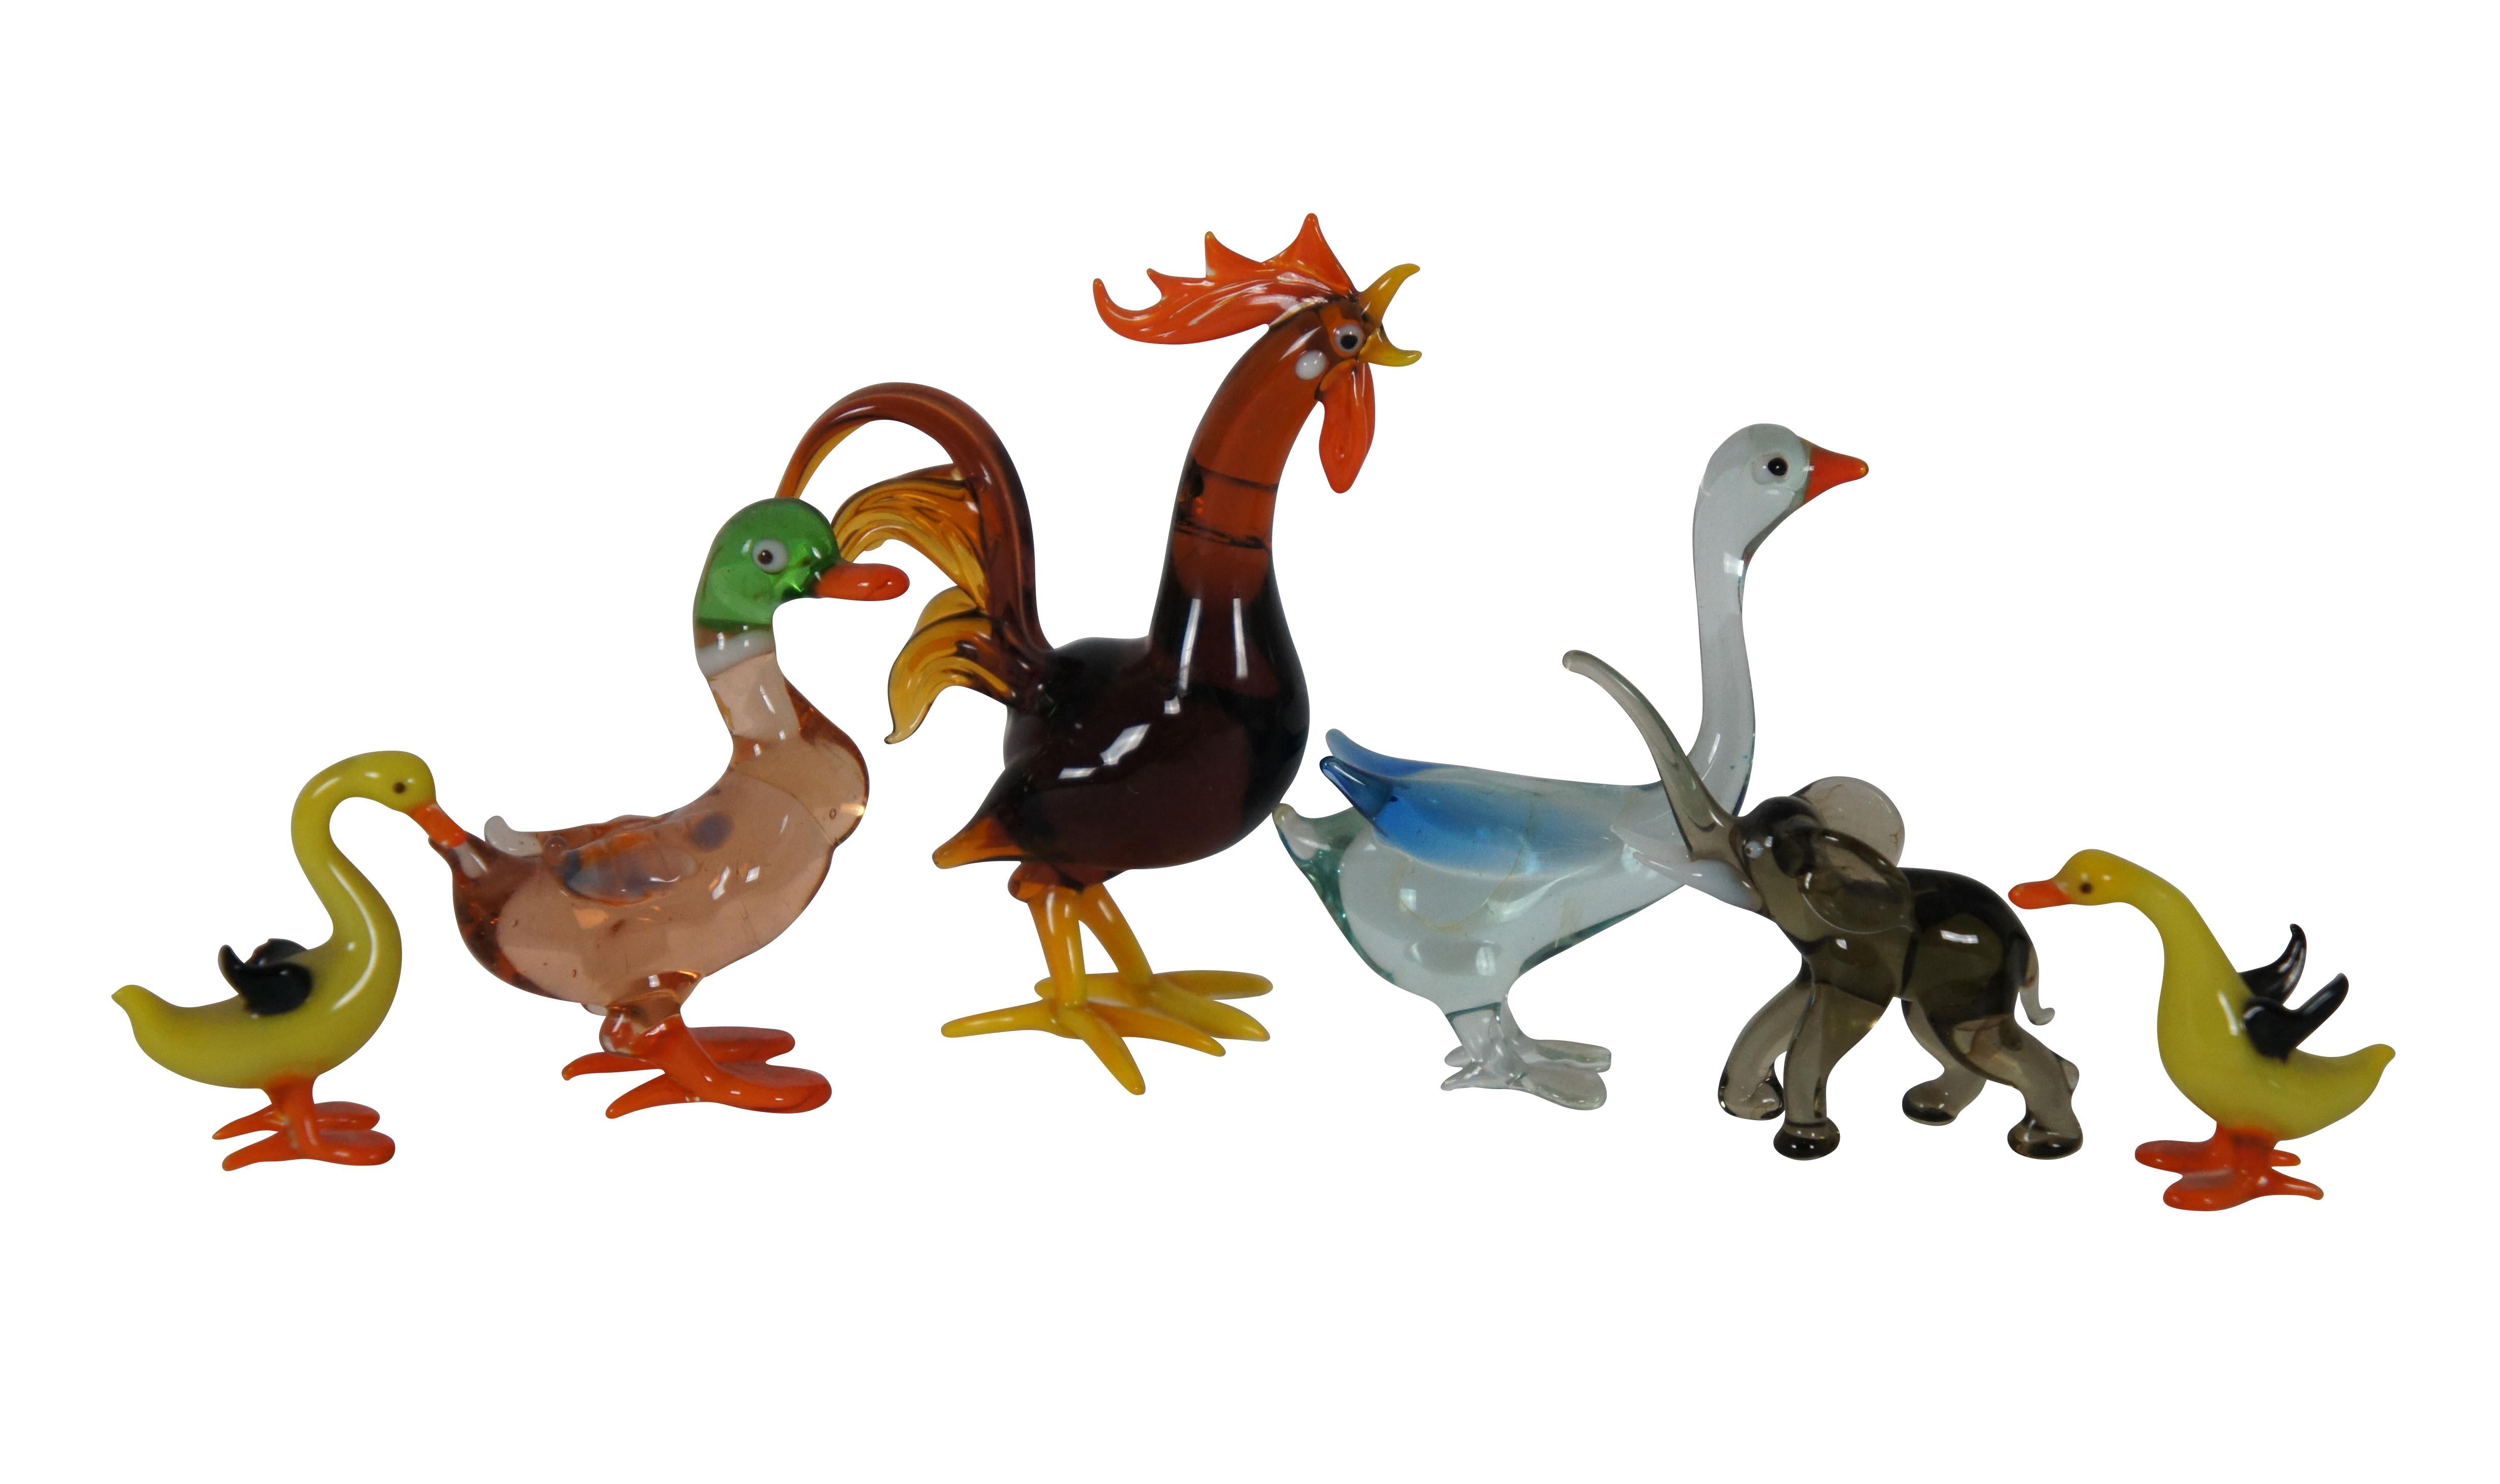 Vintage lot of twelve farmhouse ornament / figurine animals, hand blown in various colors and designs.  Includes Rooster, Chicken, Geese / Goose, Rabbit, Seal / Sea Lion, Dove, Ducks, and Elephant.

Dimensions:
Largest - 2.5” x 1.25” x 3” / Smallest